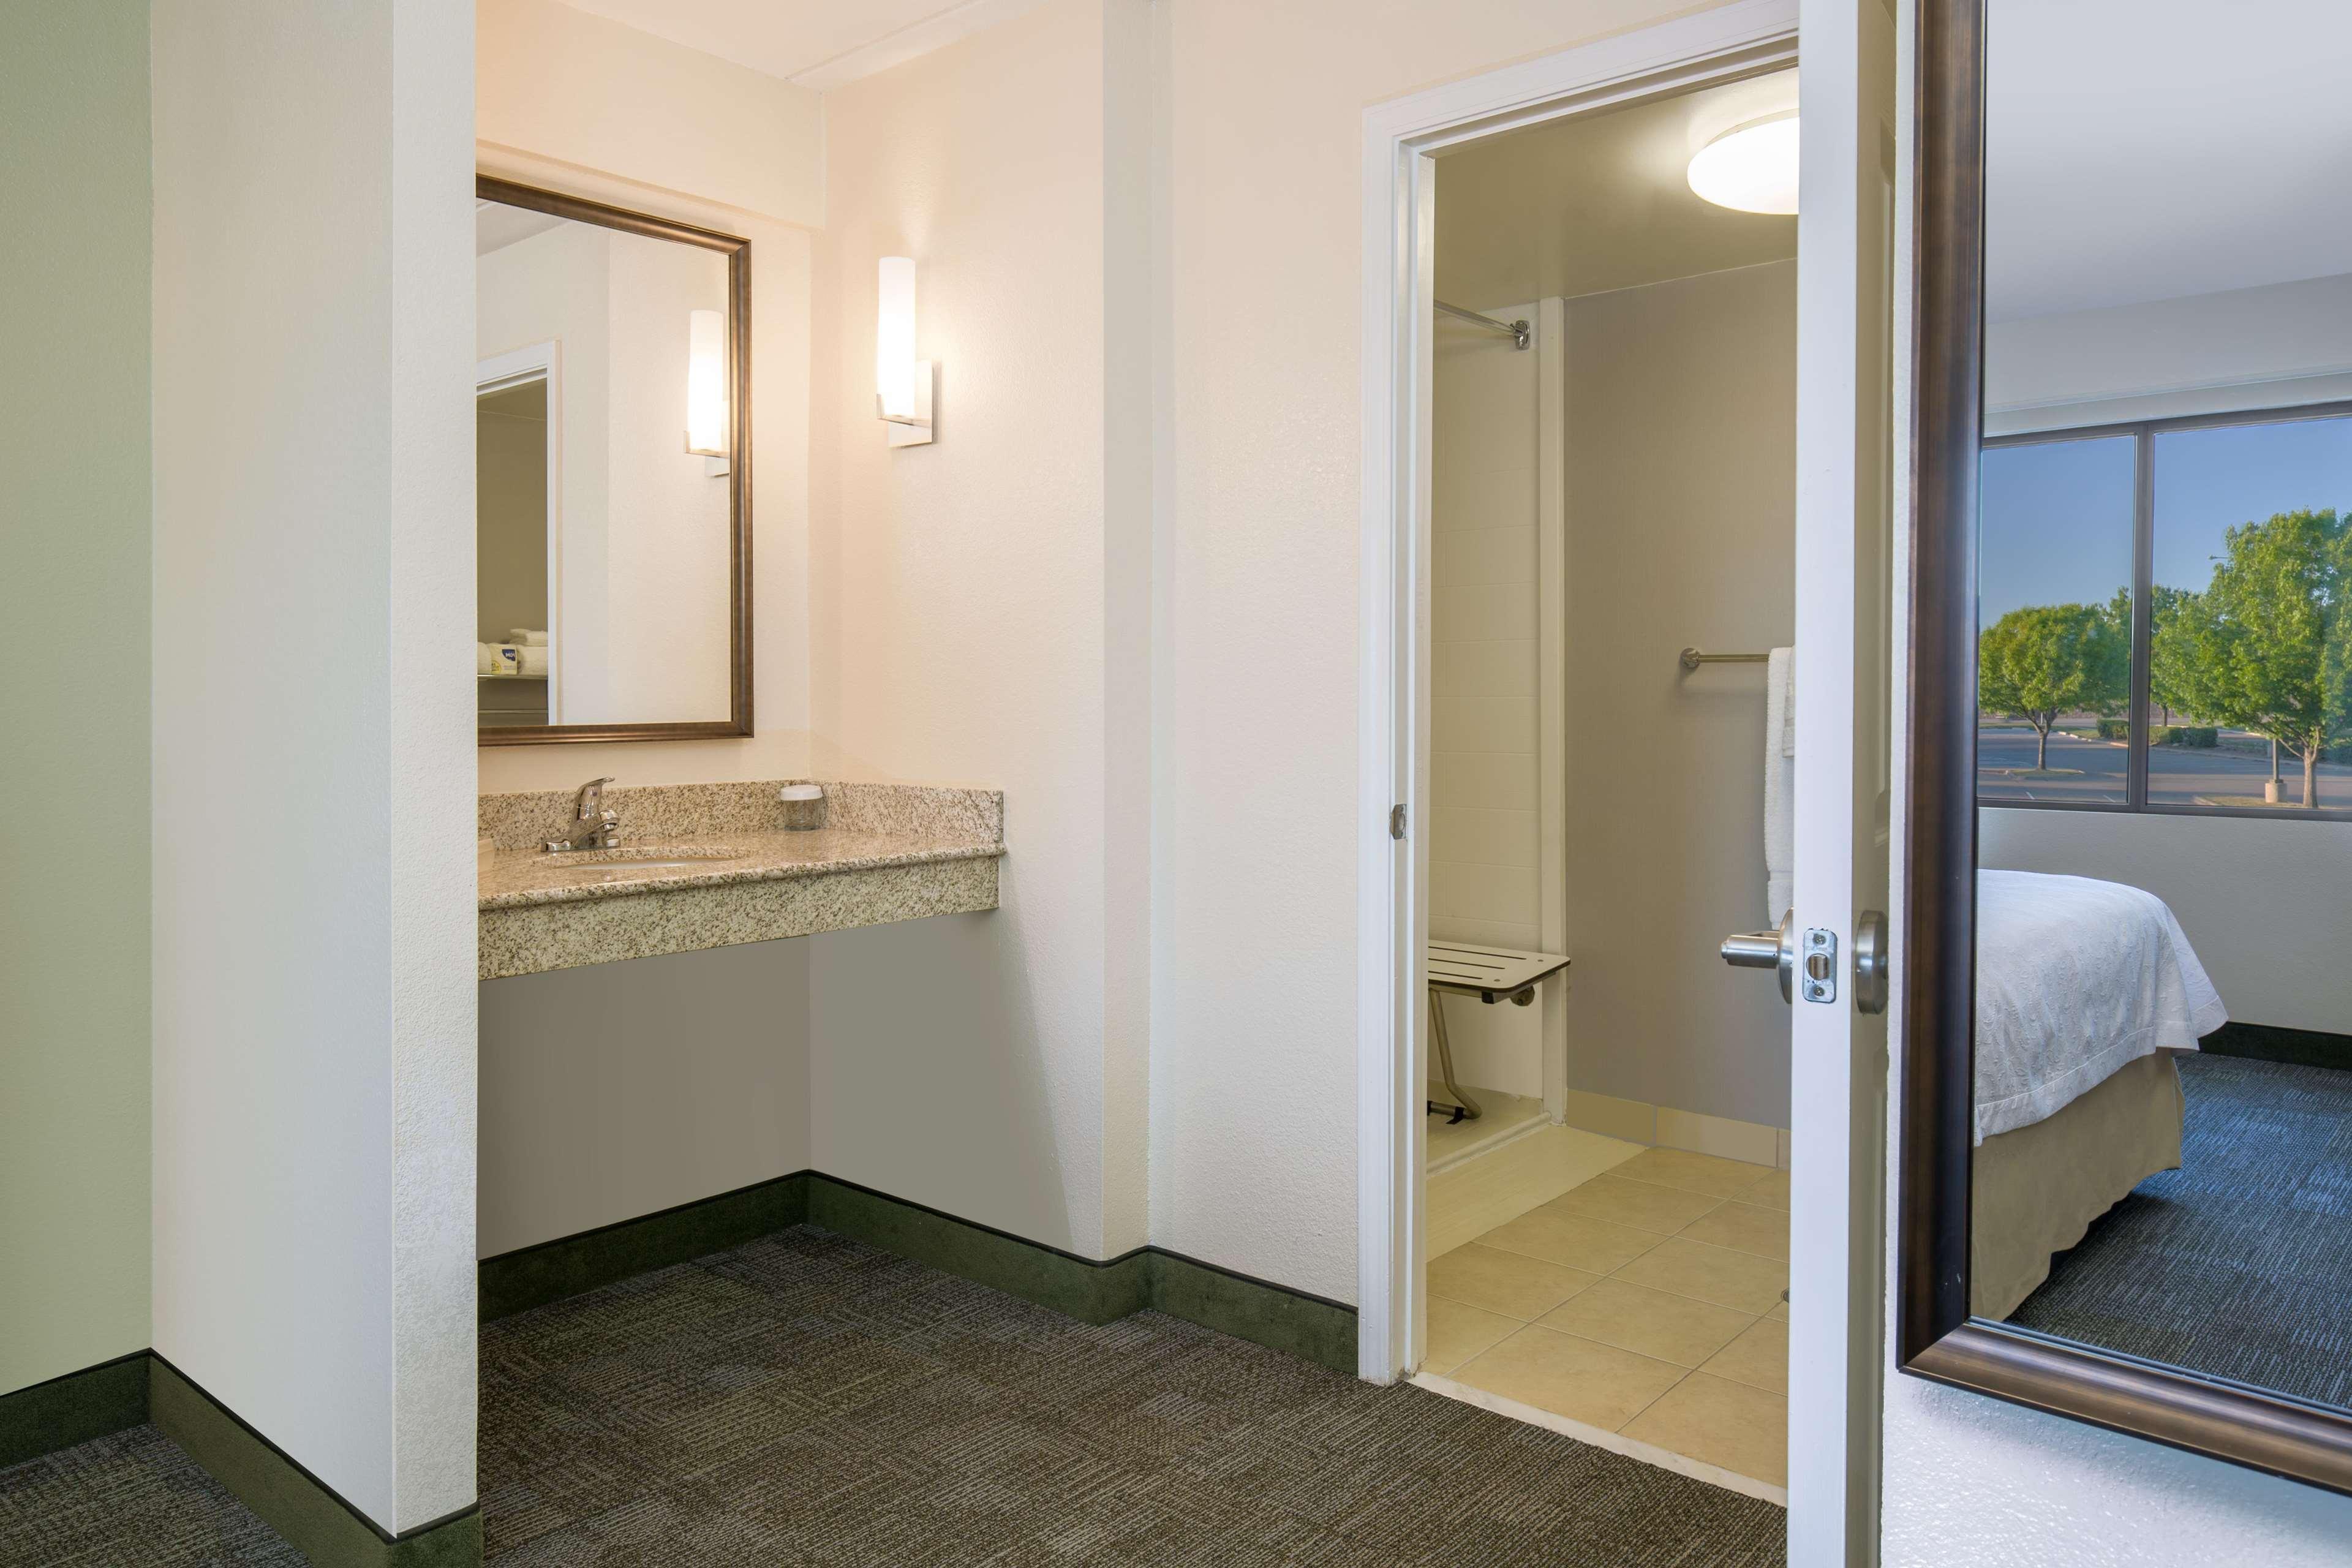 HOTEL HOMEWOOD SUITES BY HILTON FT. WORTH-NORTH AT FOSSIL CREEK FORT WORTH,  TX 3* (United States) - from US$ 88 | BOOKED